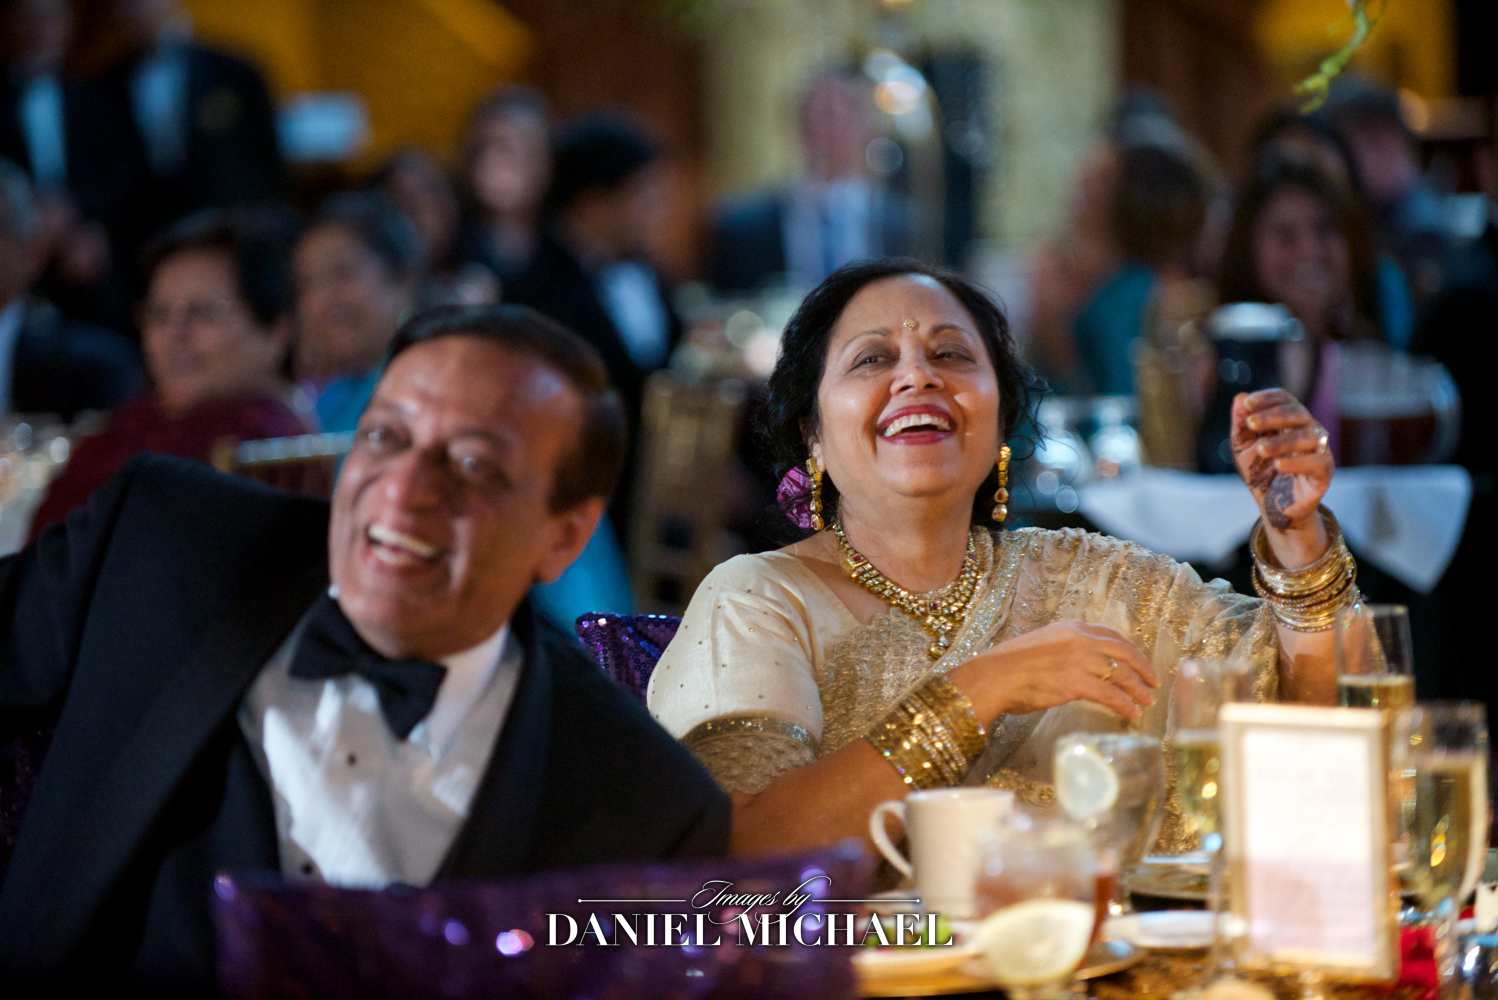 South Asian wedding photographer capturing a candid moment of parents at a reception